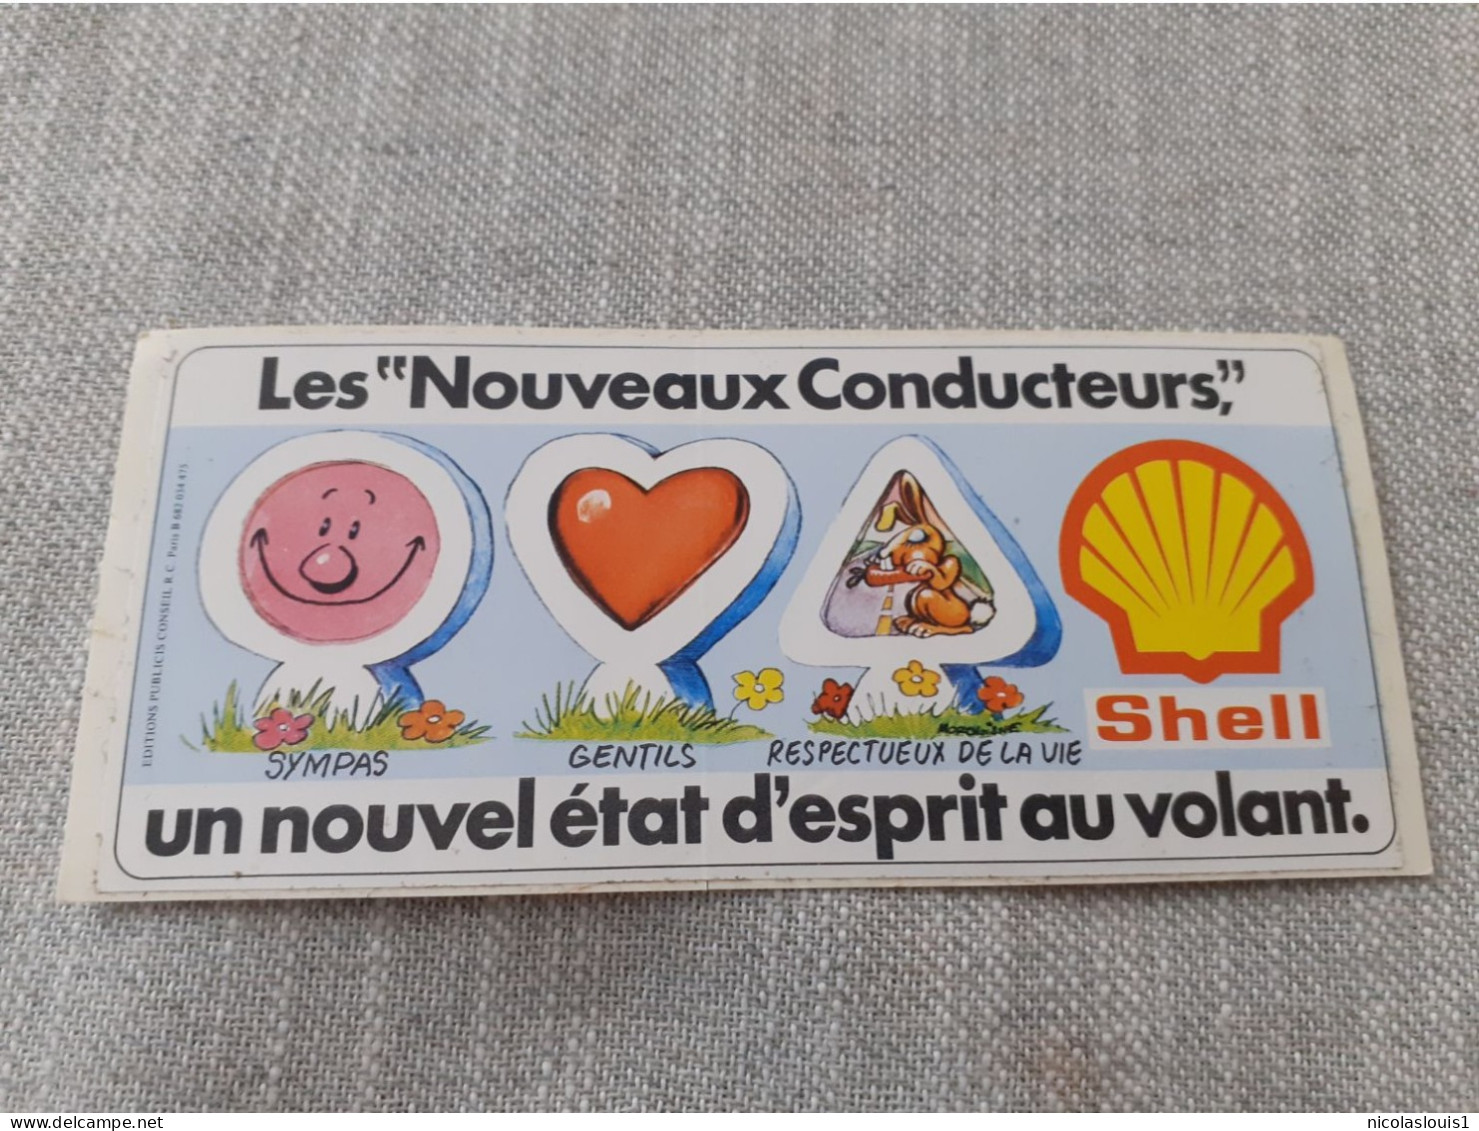 Autocollant Shell, - Stickers